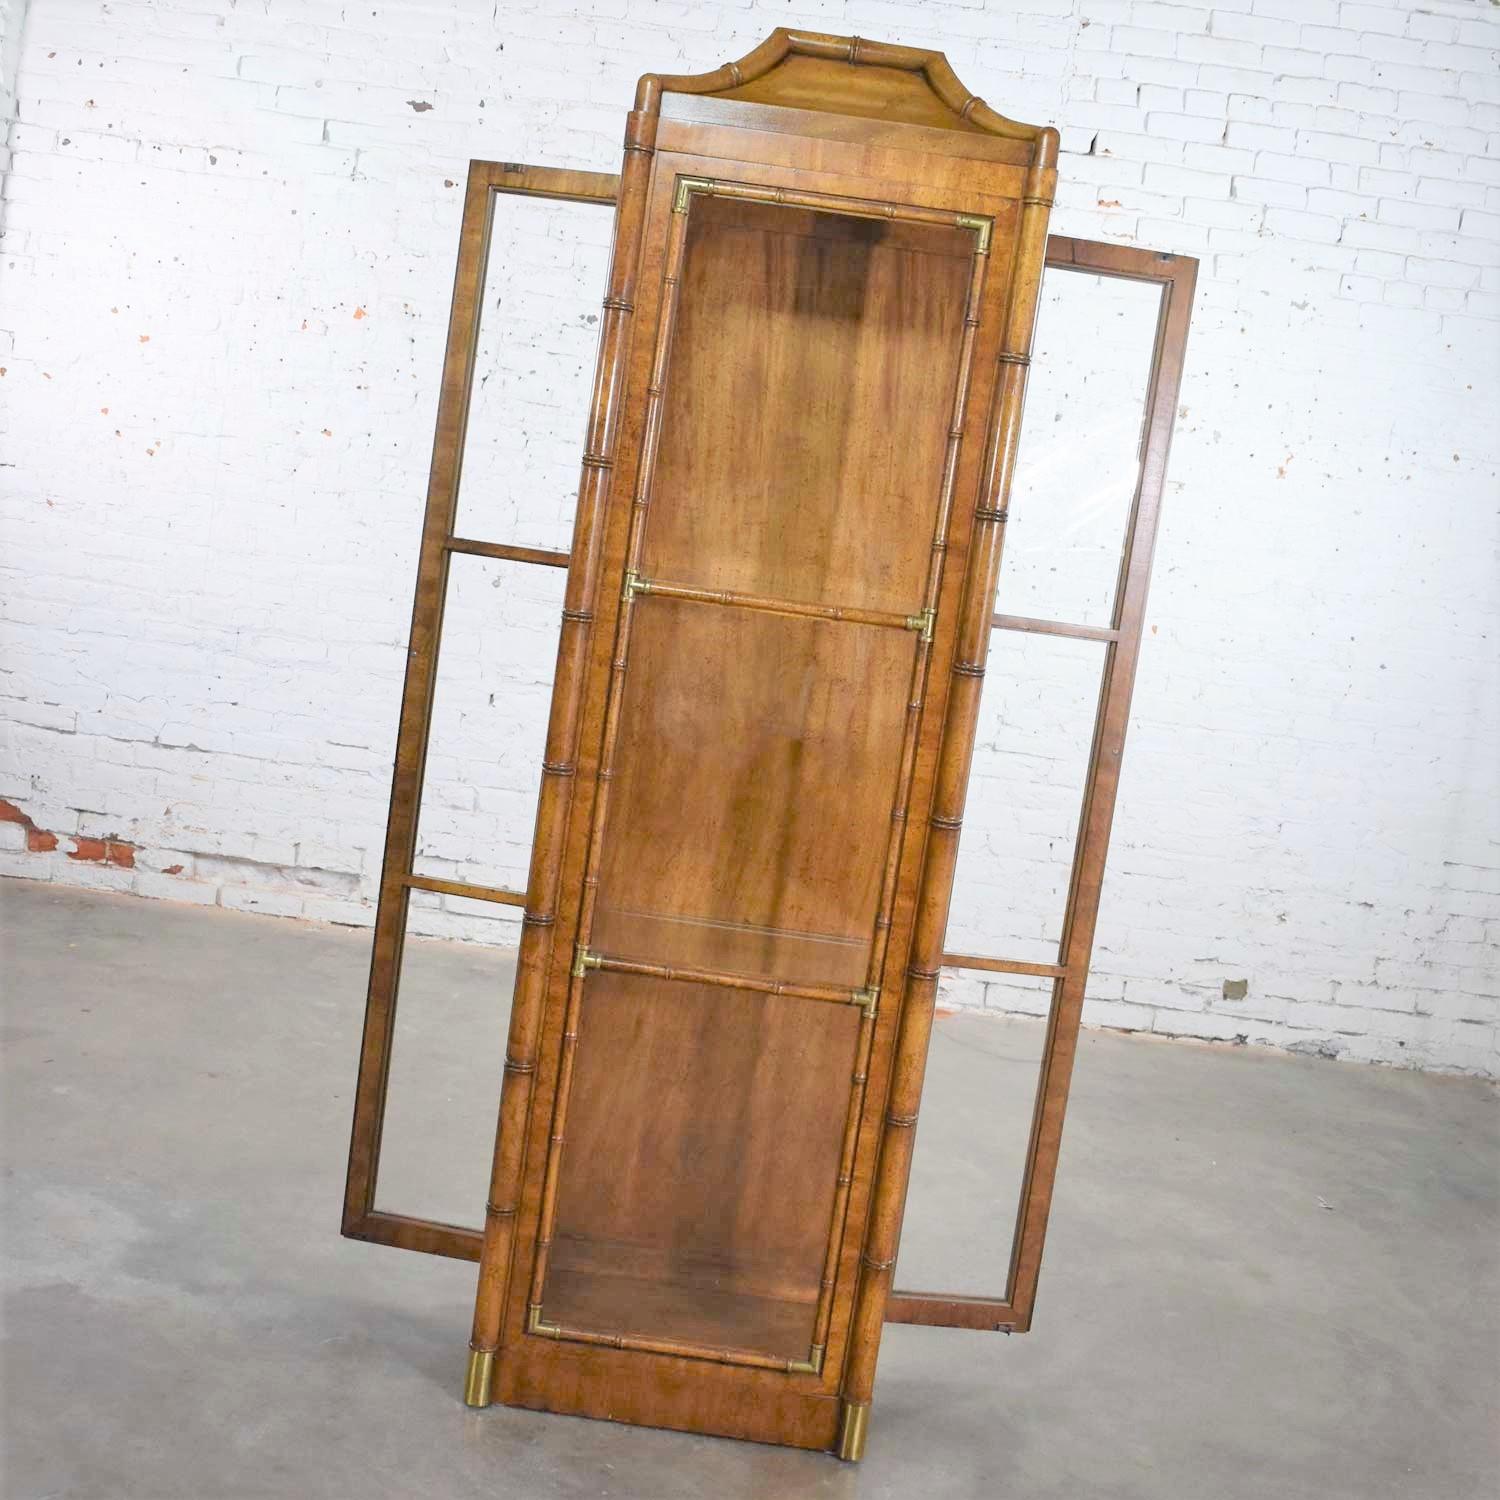 20th Century Weiman Hollywood Regency Campaign Style Faux Bamboo Narrow Lighted Display Cabin